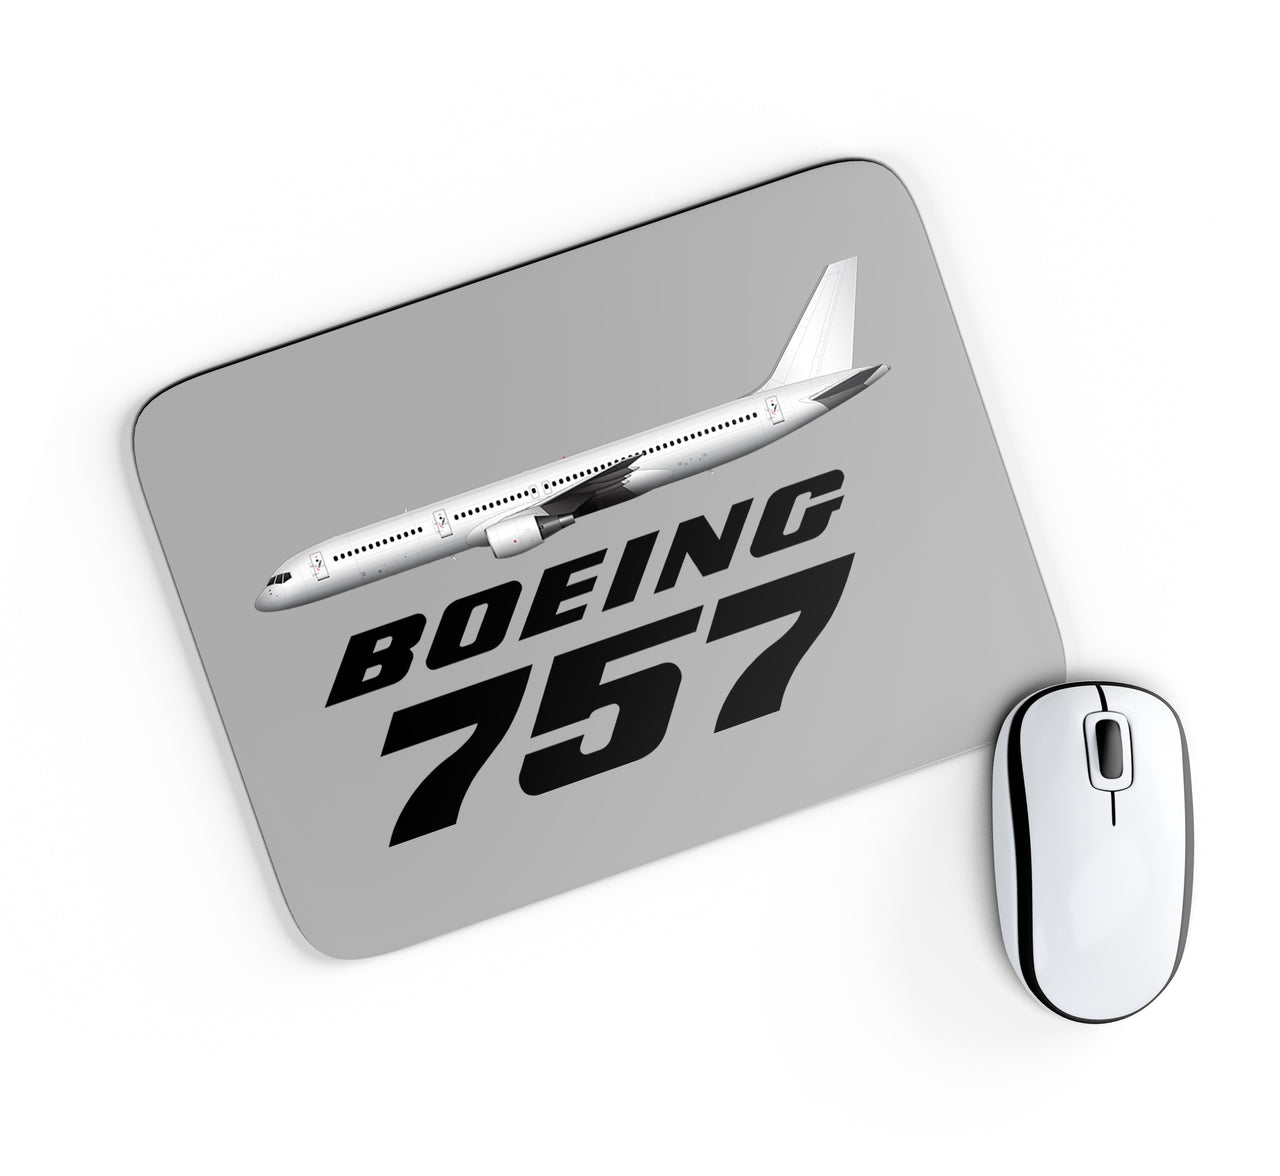 The Boeing 757 Designed Mouse Pads